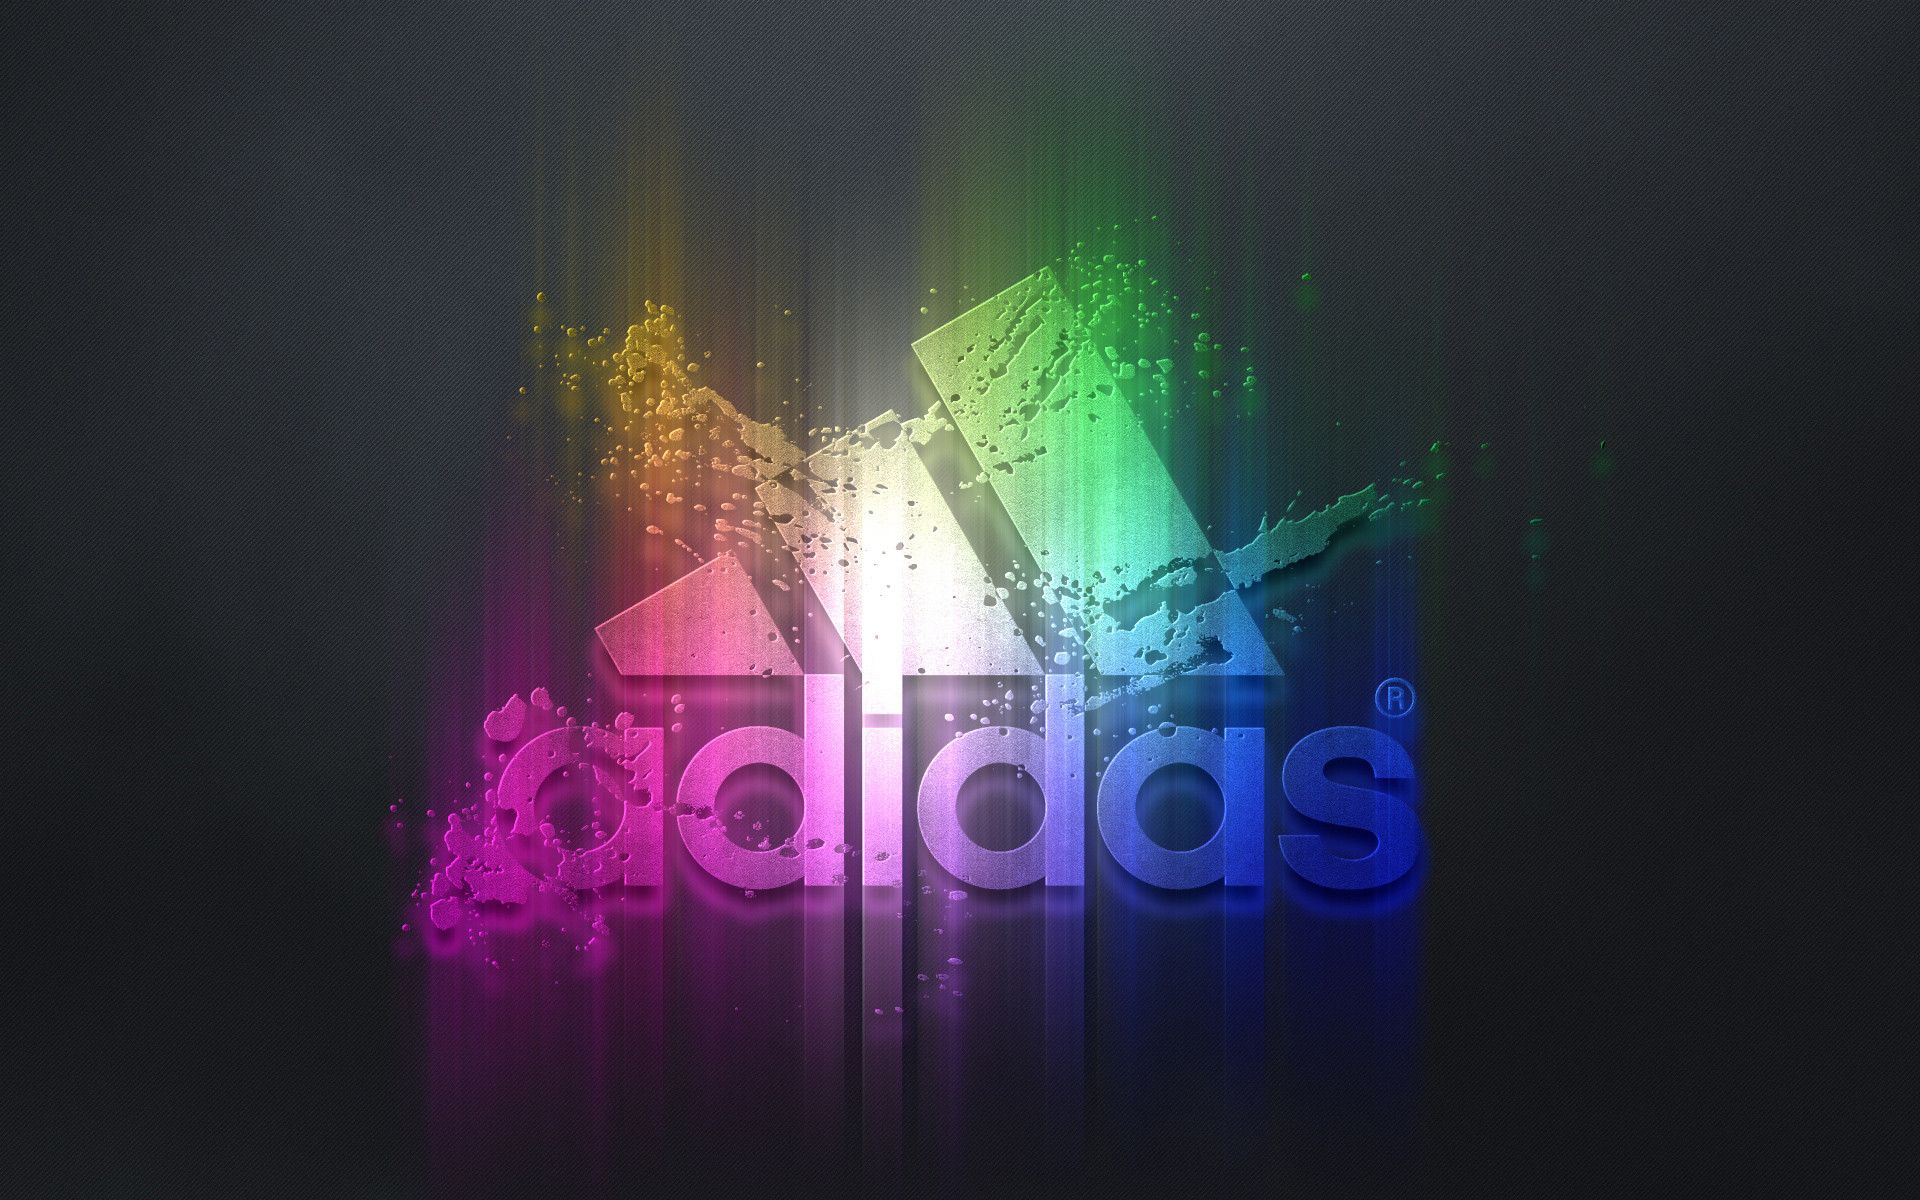 Cool Adidas Soccer Wallpapers